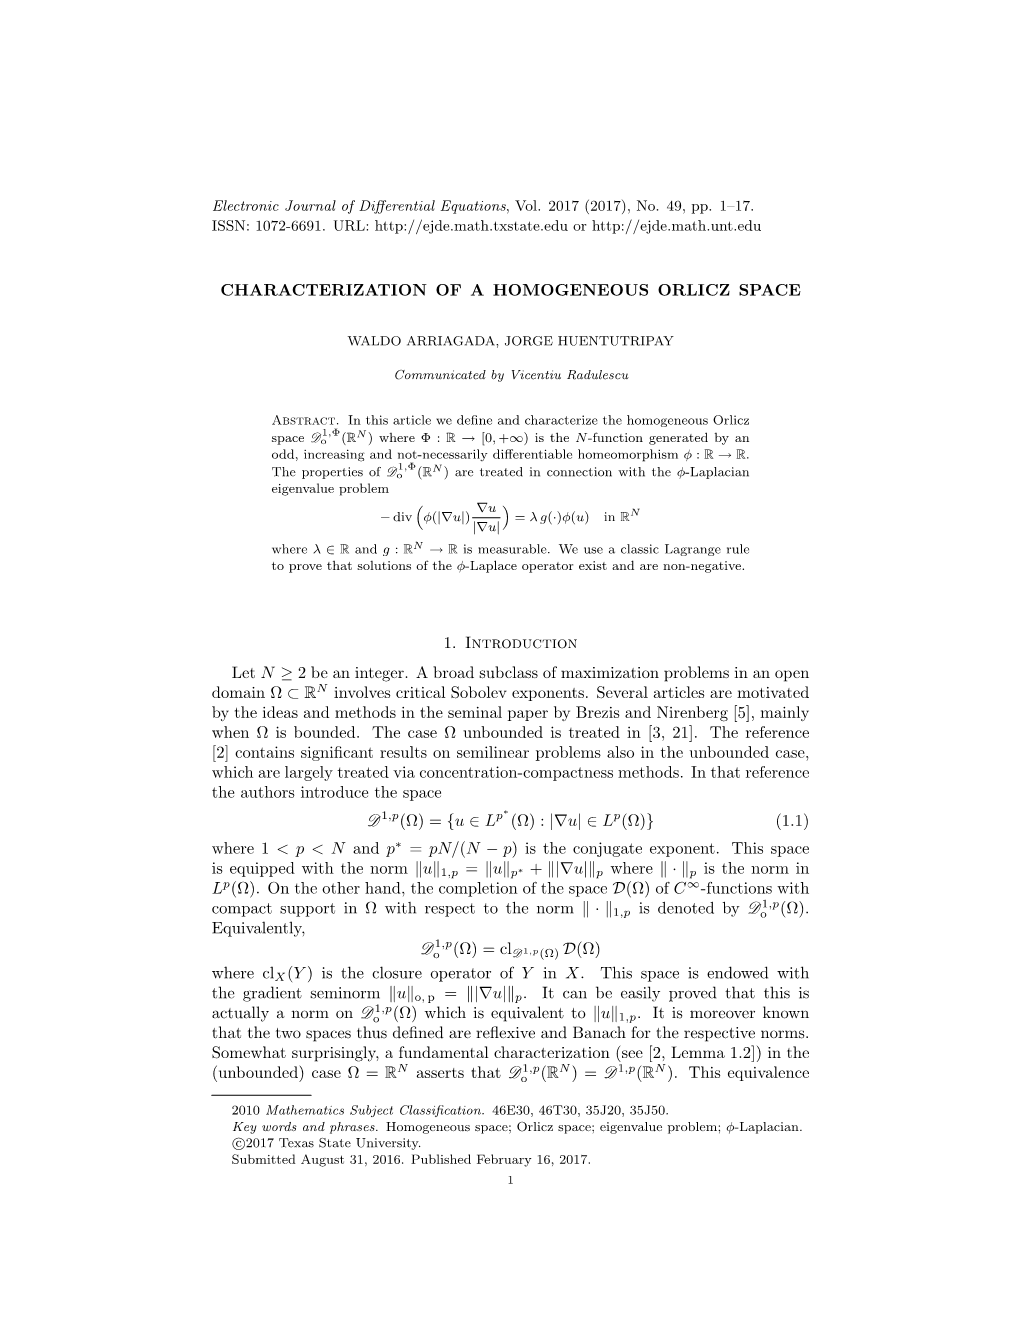 Characterization of a Homogeneous Orlicz Space